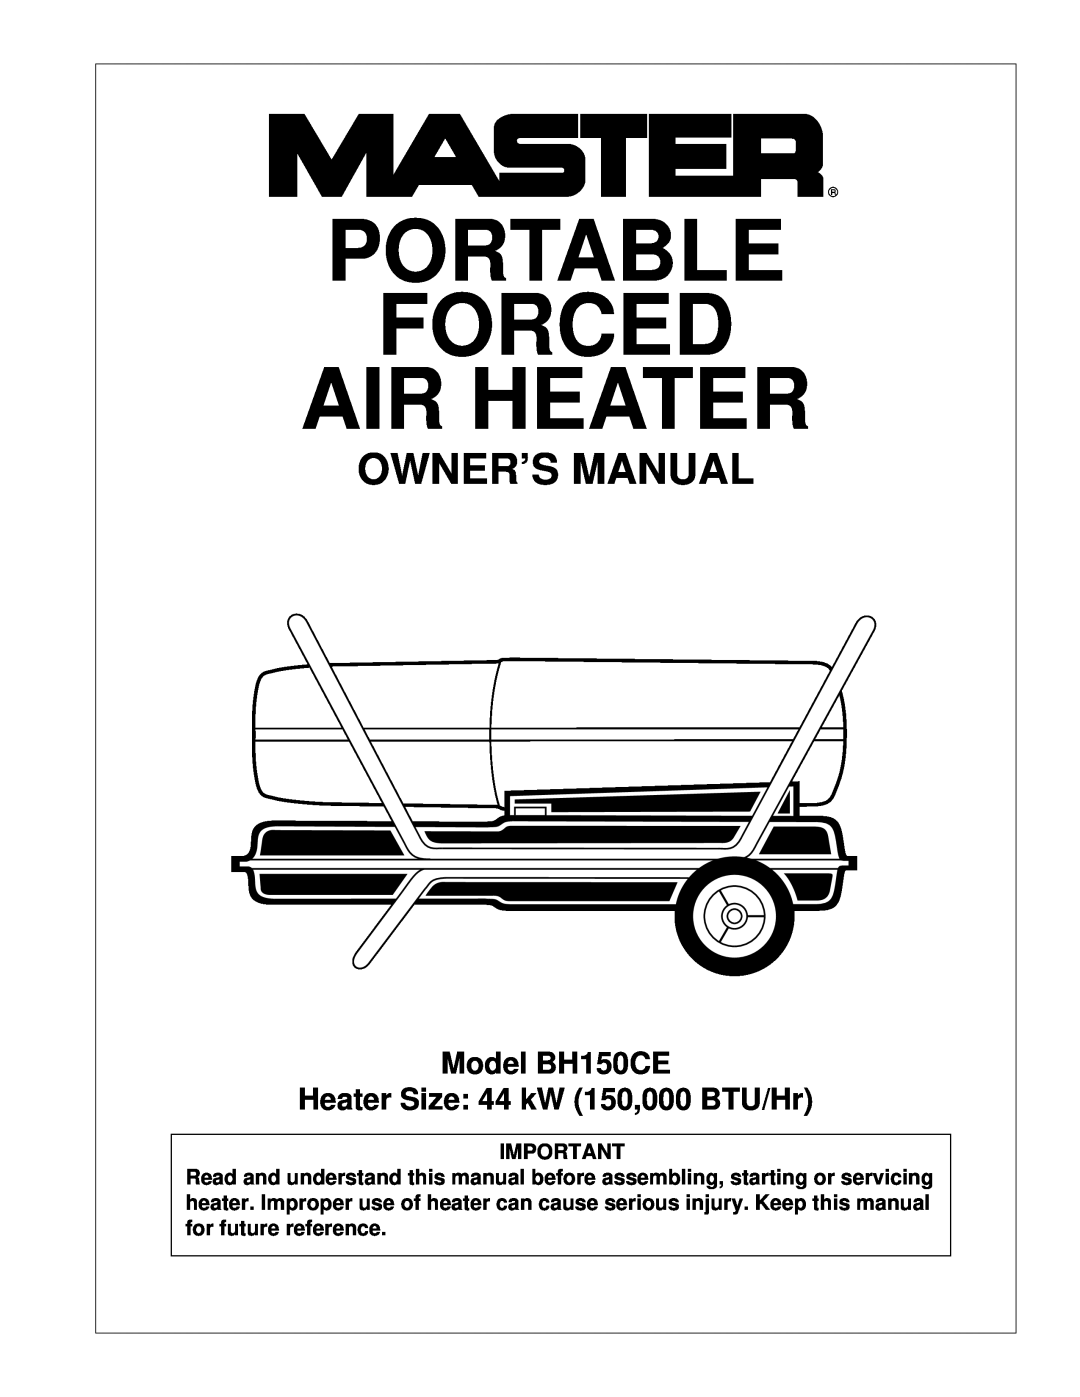 Master Lock owner manual Portable Forced Air Heater, Model BH150CE Heater Size 44 kW 150,000 BTU/Hr 